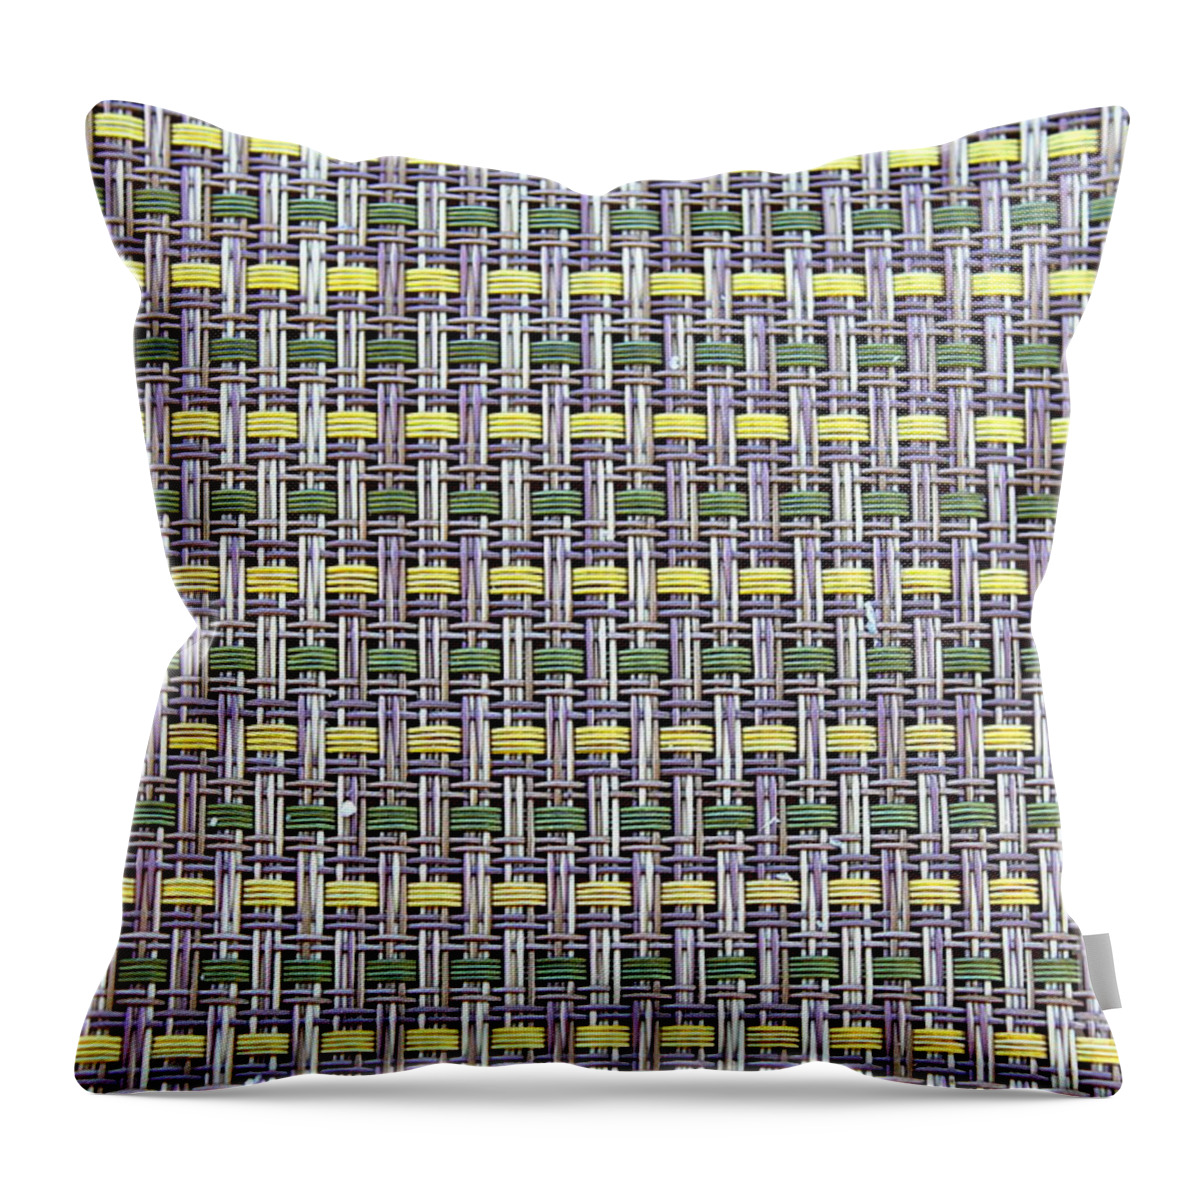 Bamboo Throw Pillow featuring the photograph Placemat by Henrik Lehnerer